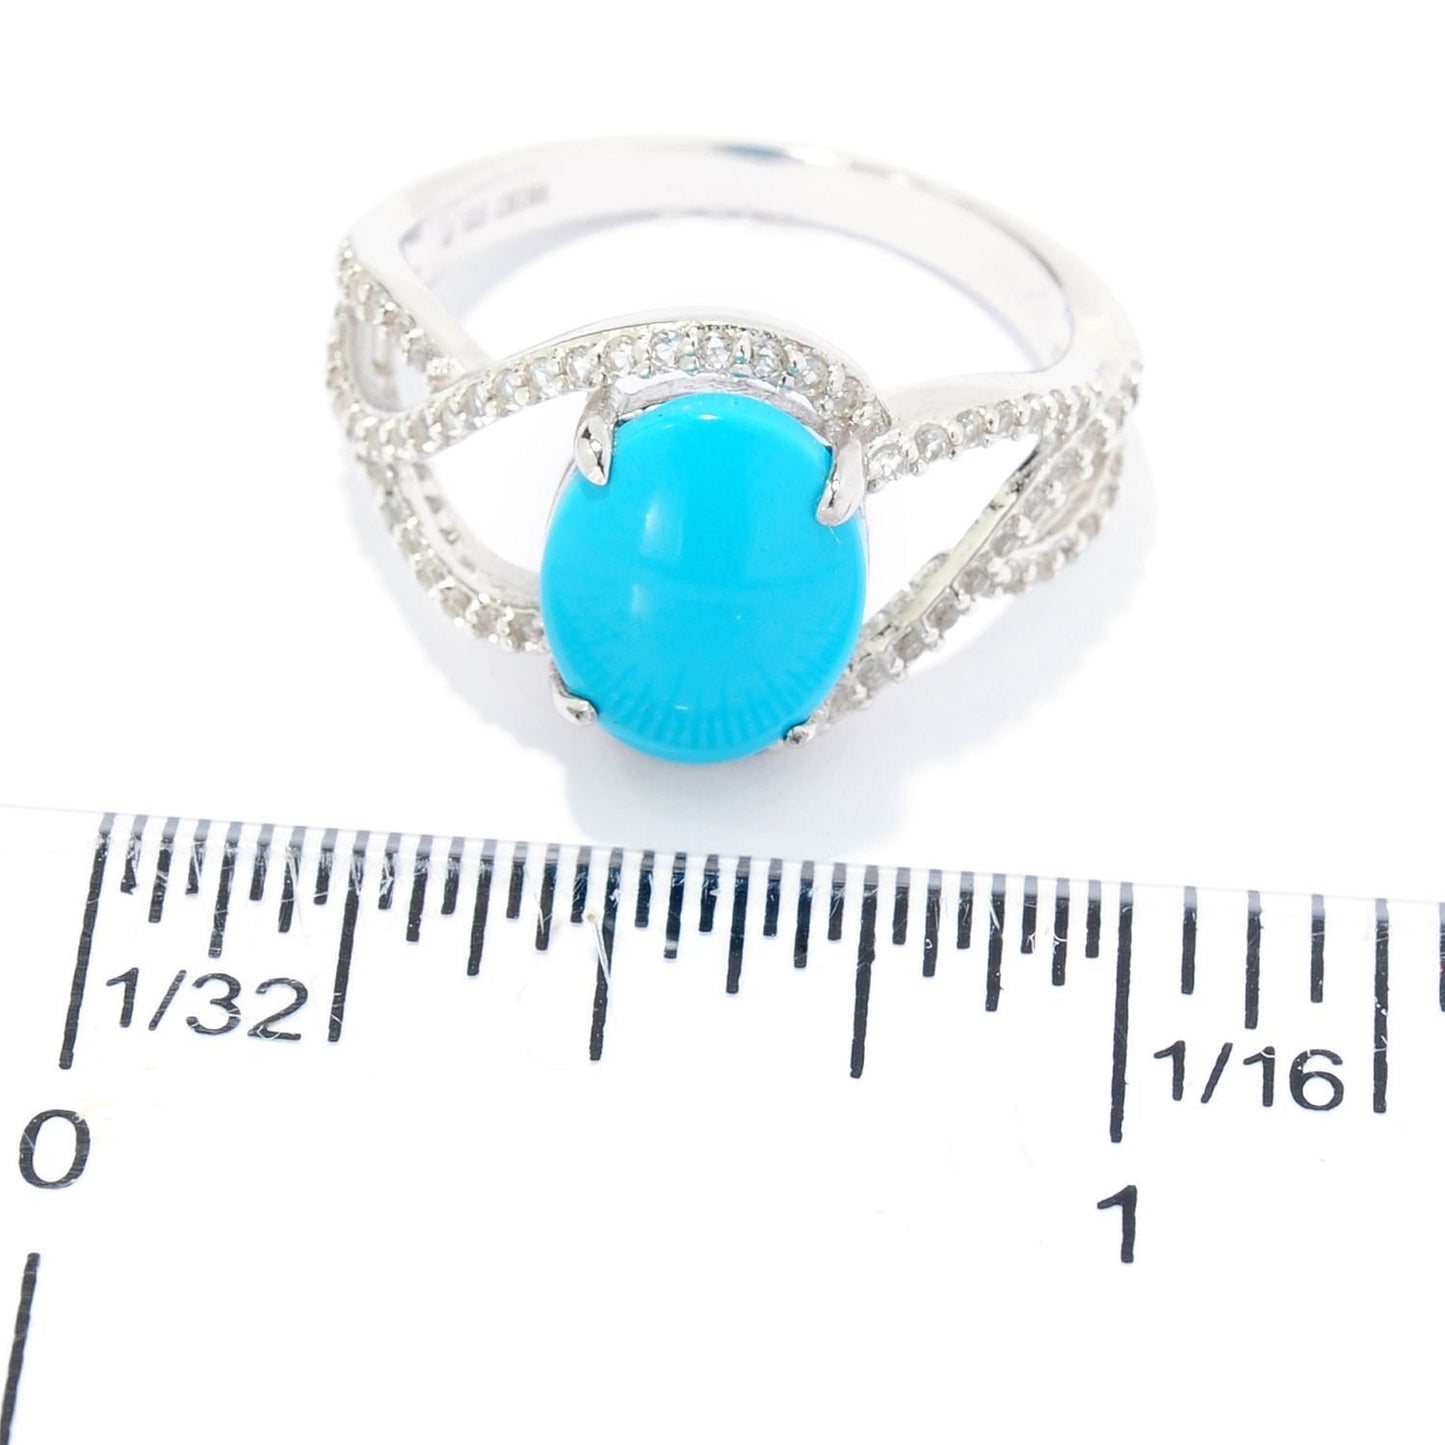 Sonora Beauty Turquoise Gemstone Ring, 925 Sterling Silver Ring, Engagement Ring, Boho Ring-Gemstone Jewelry Anniversary Gift For Her